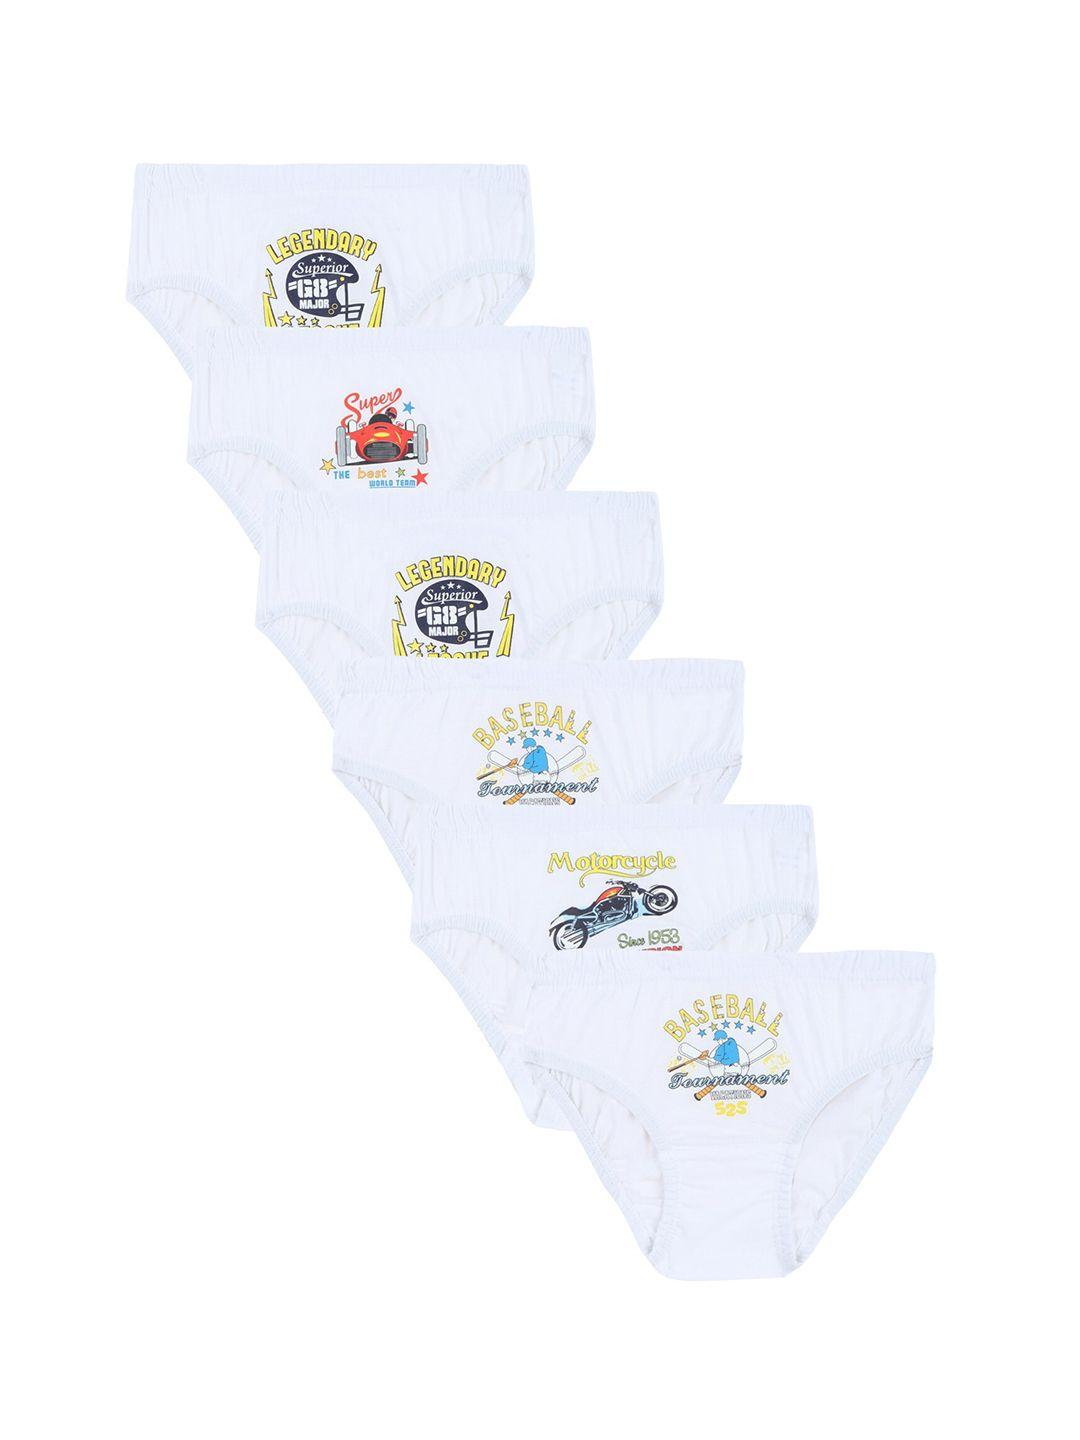 dyca boys pack of 6 white printed cotton briefs